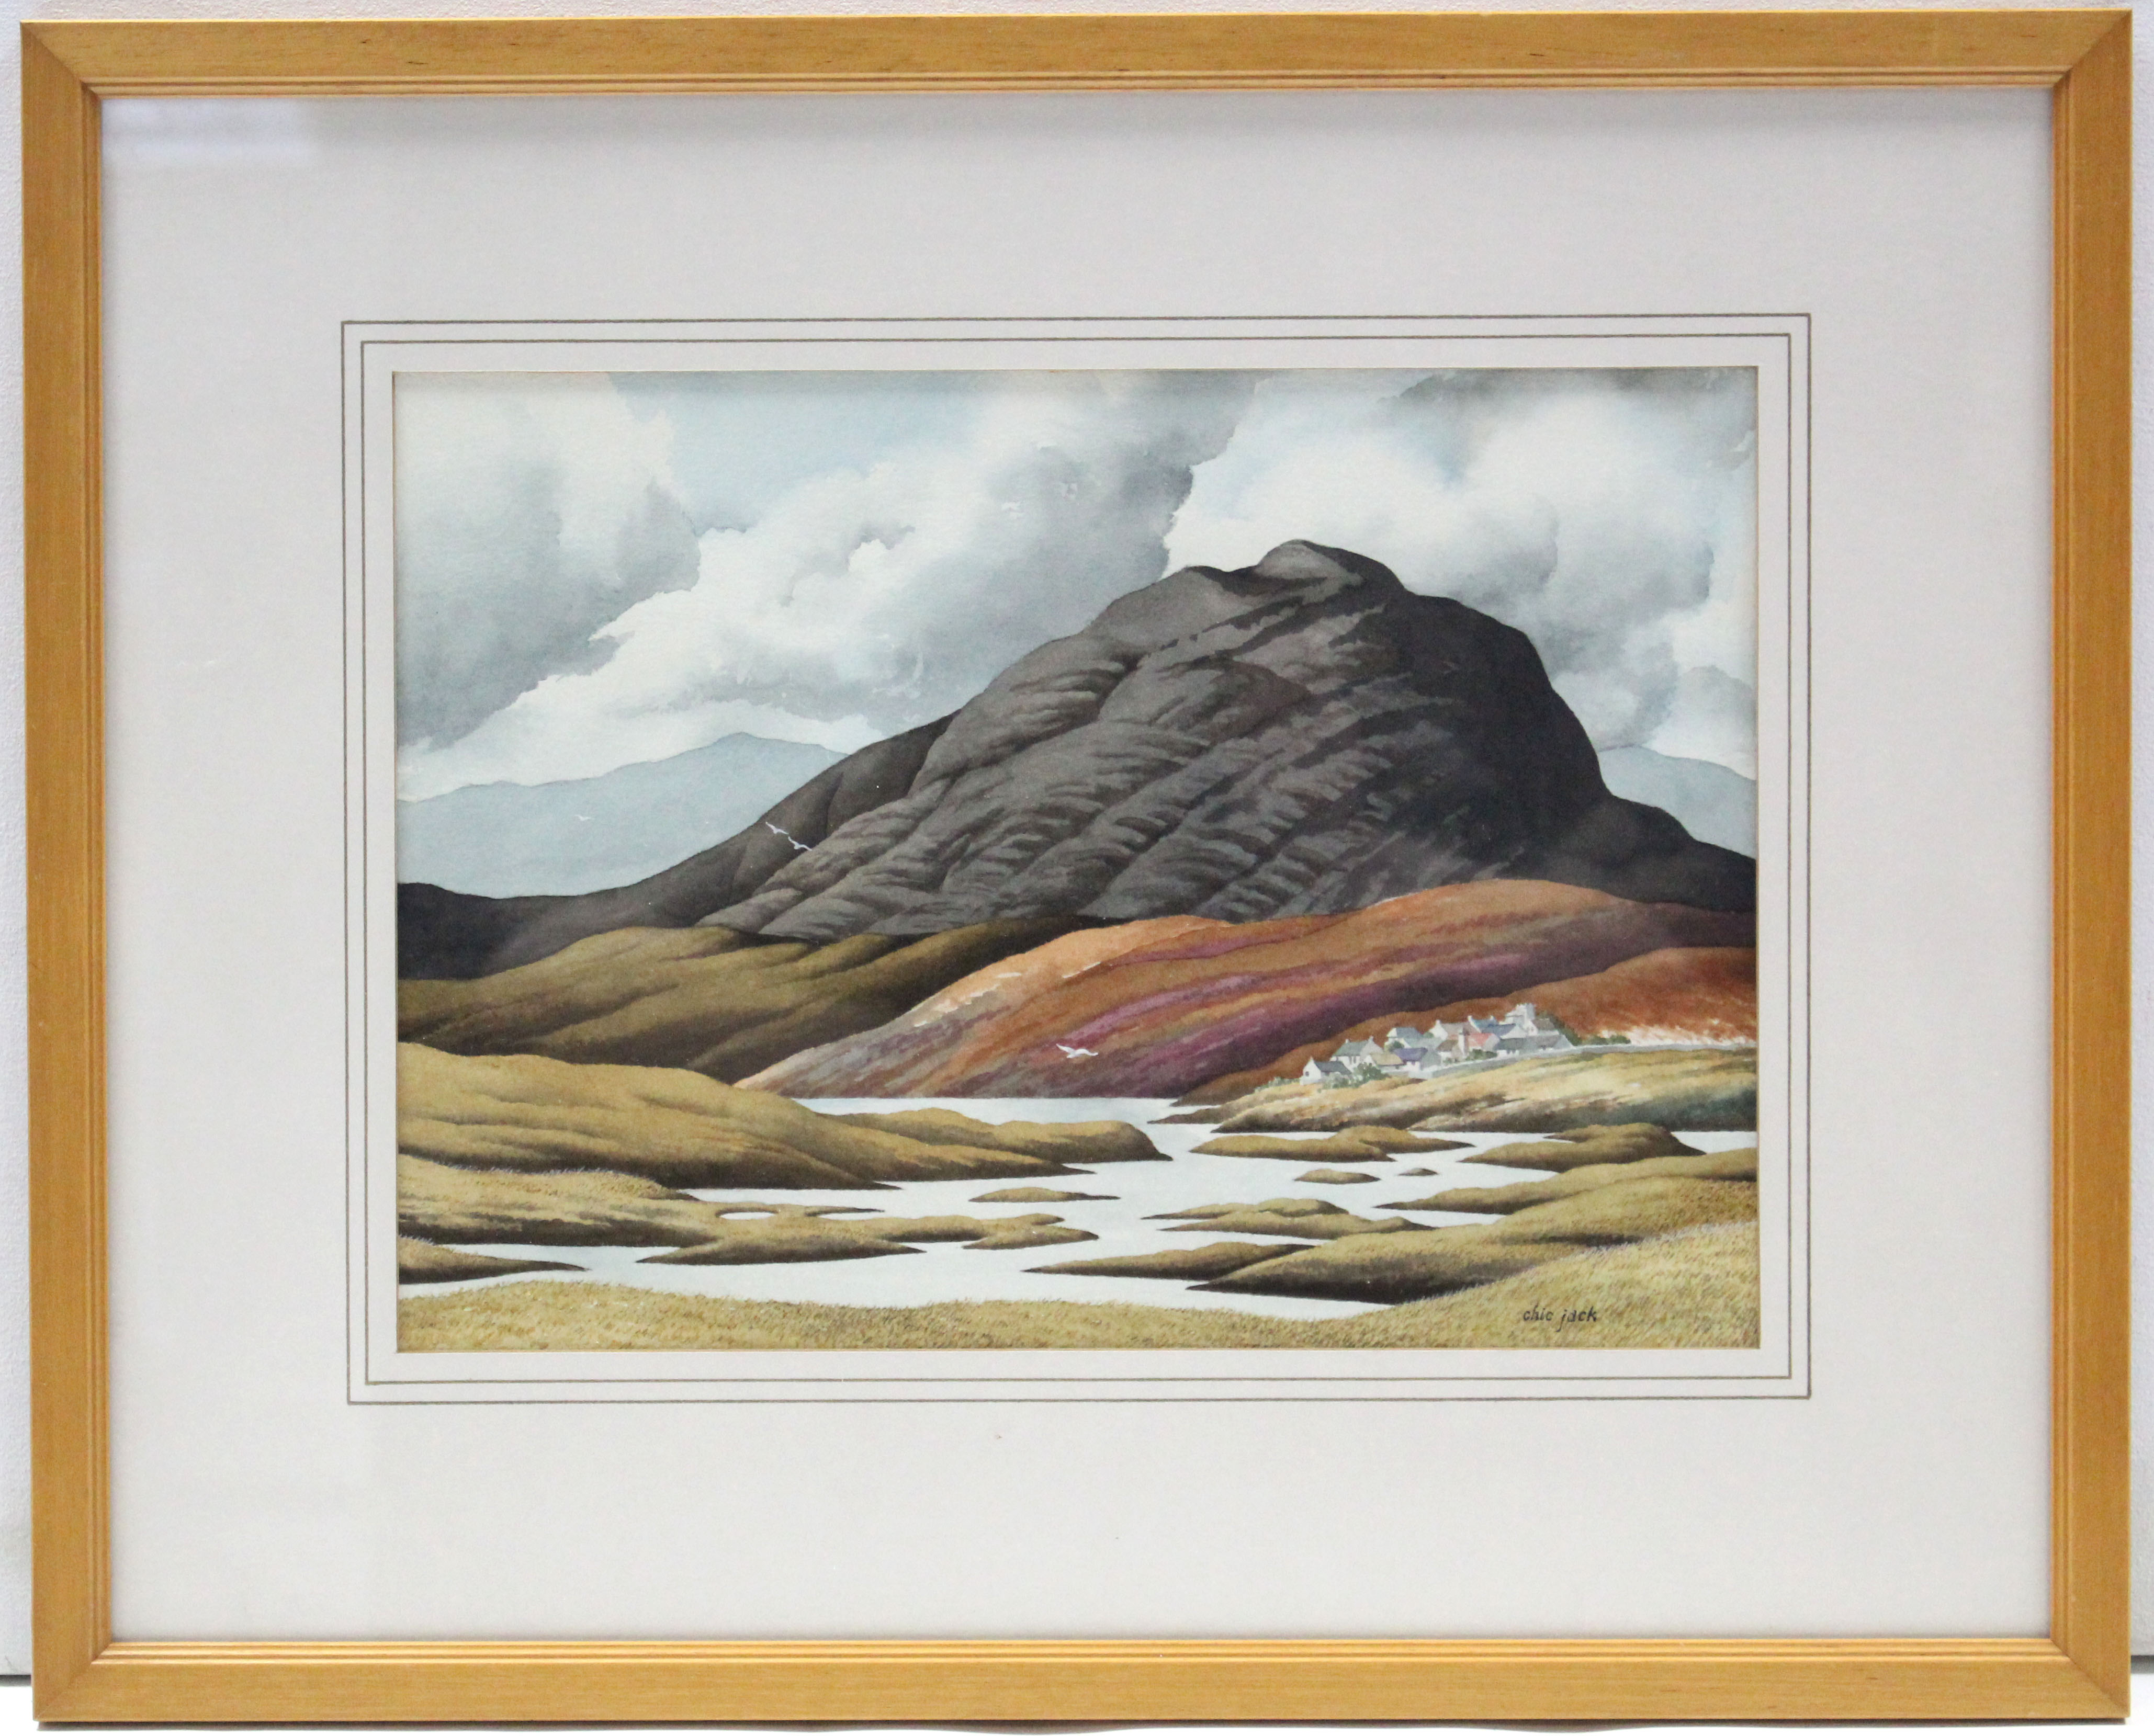 C. D. (Chic) JACK (20th century). Three landscape studies titled: “Western Inlet”, “Curlew